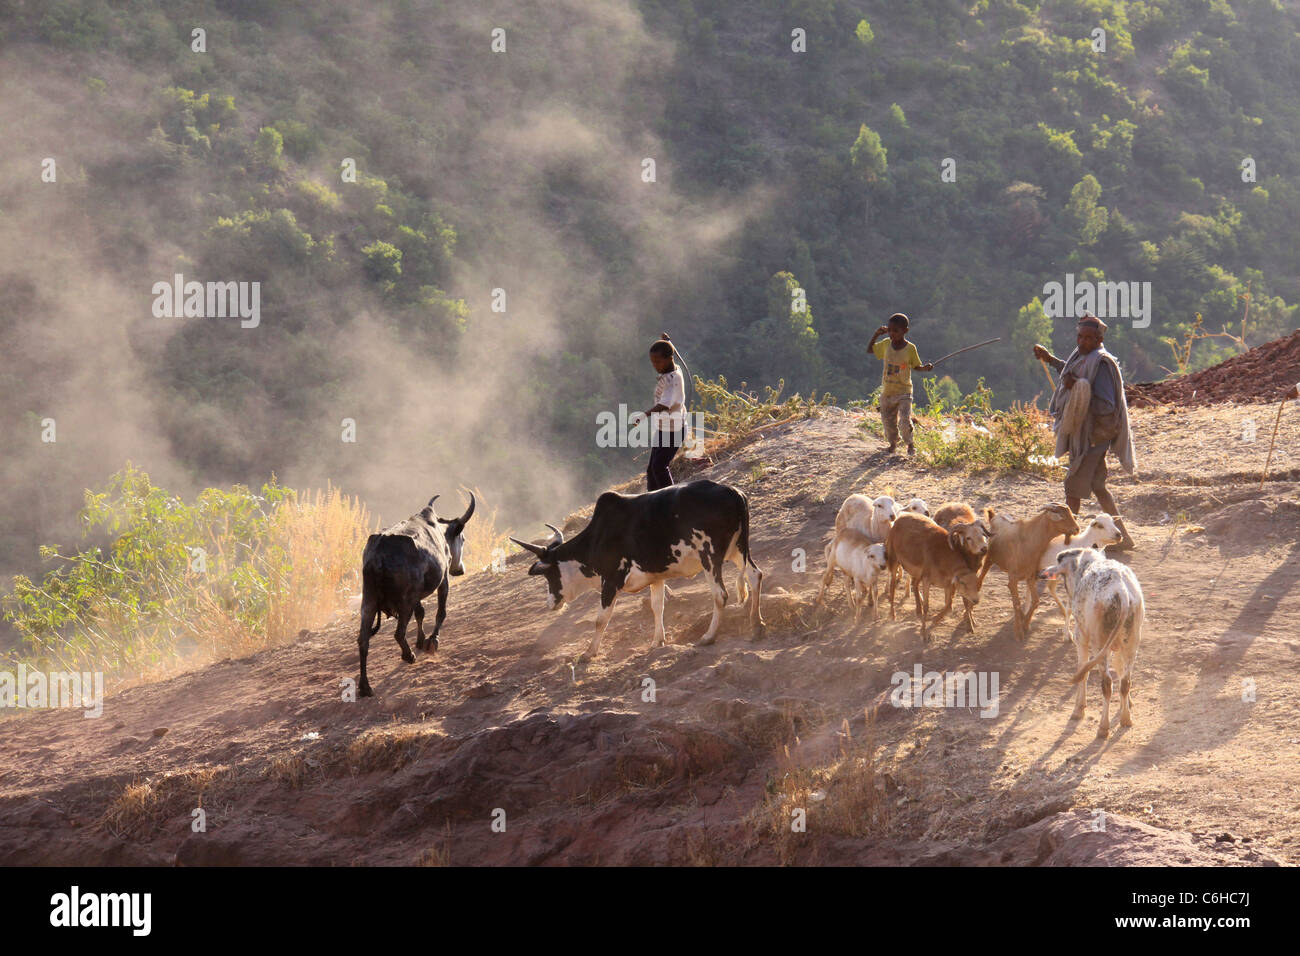 A man and two boys on a steep slope herding two cows and goats Stock Photo